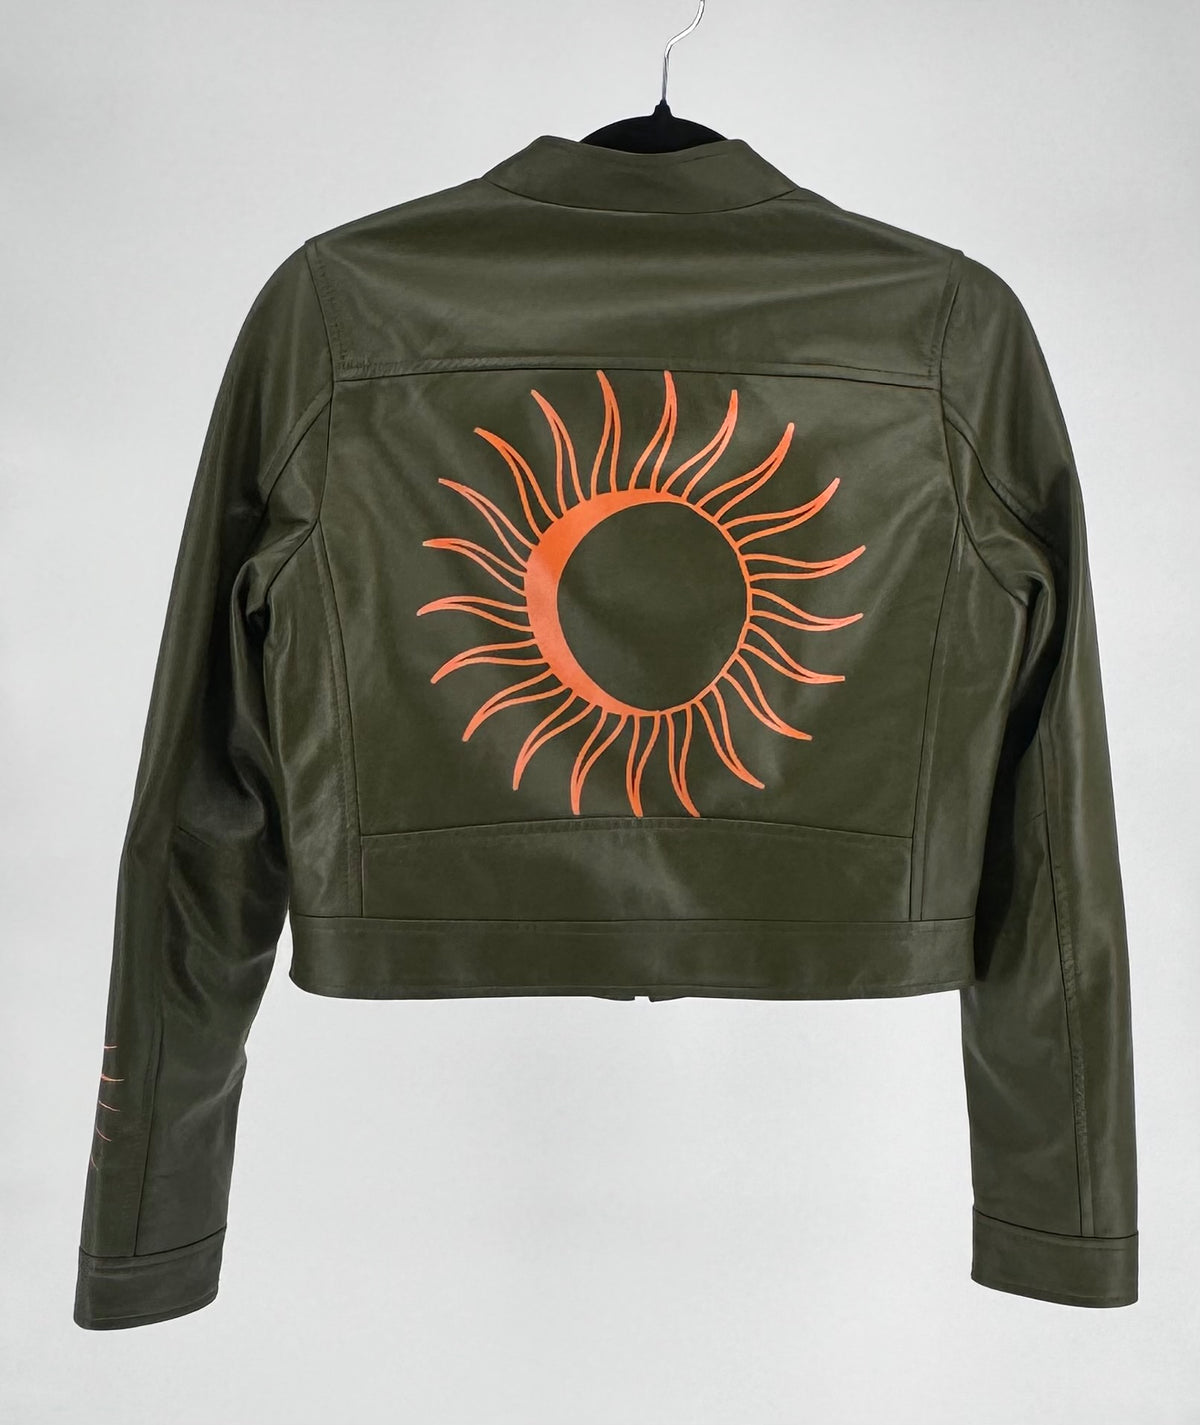 Let The Sun Shine In - army green leather jacket